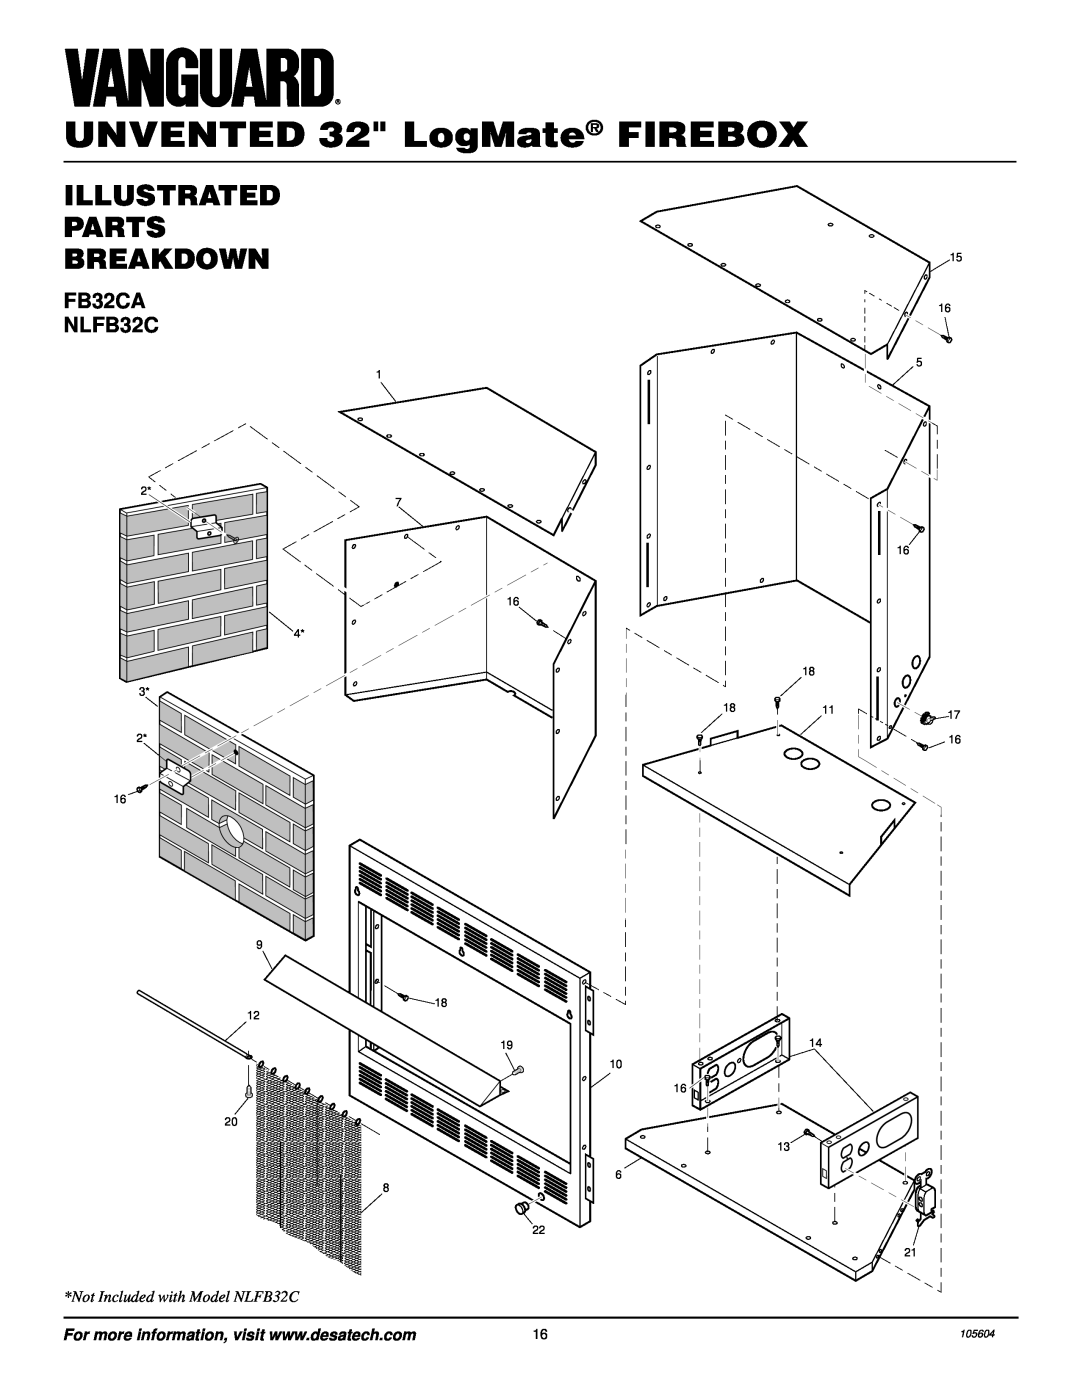 Vanguard Managed Solutions FB32NCA Illustrated Parts Breakdown, FB32CA NLFB32C, UNVENTED 32 LogMate FIREBOX, 2 4 3 2 16 